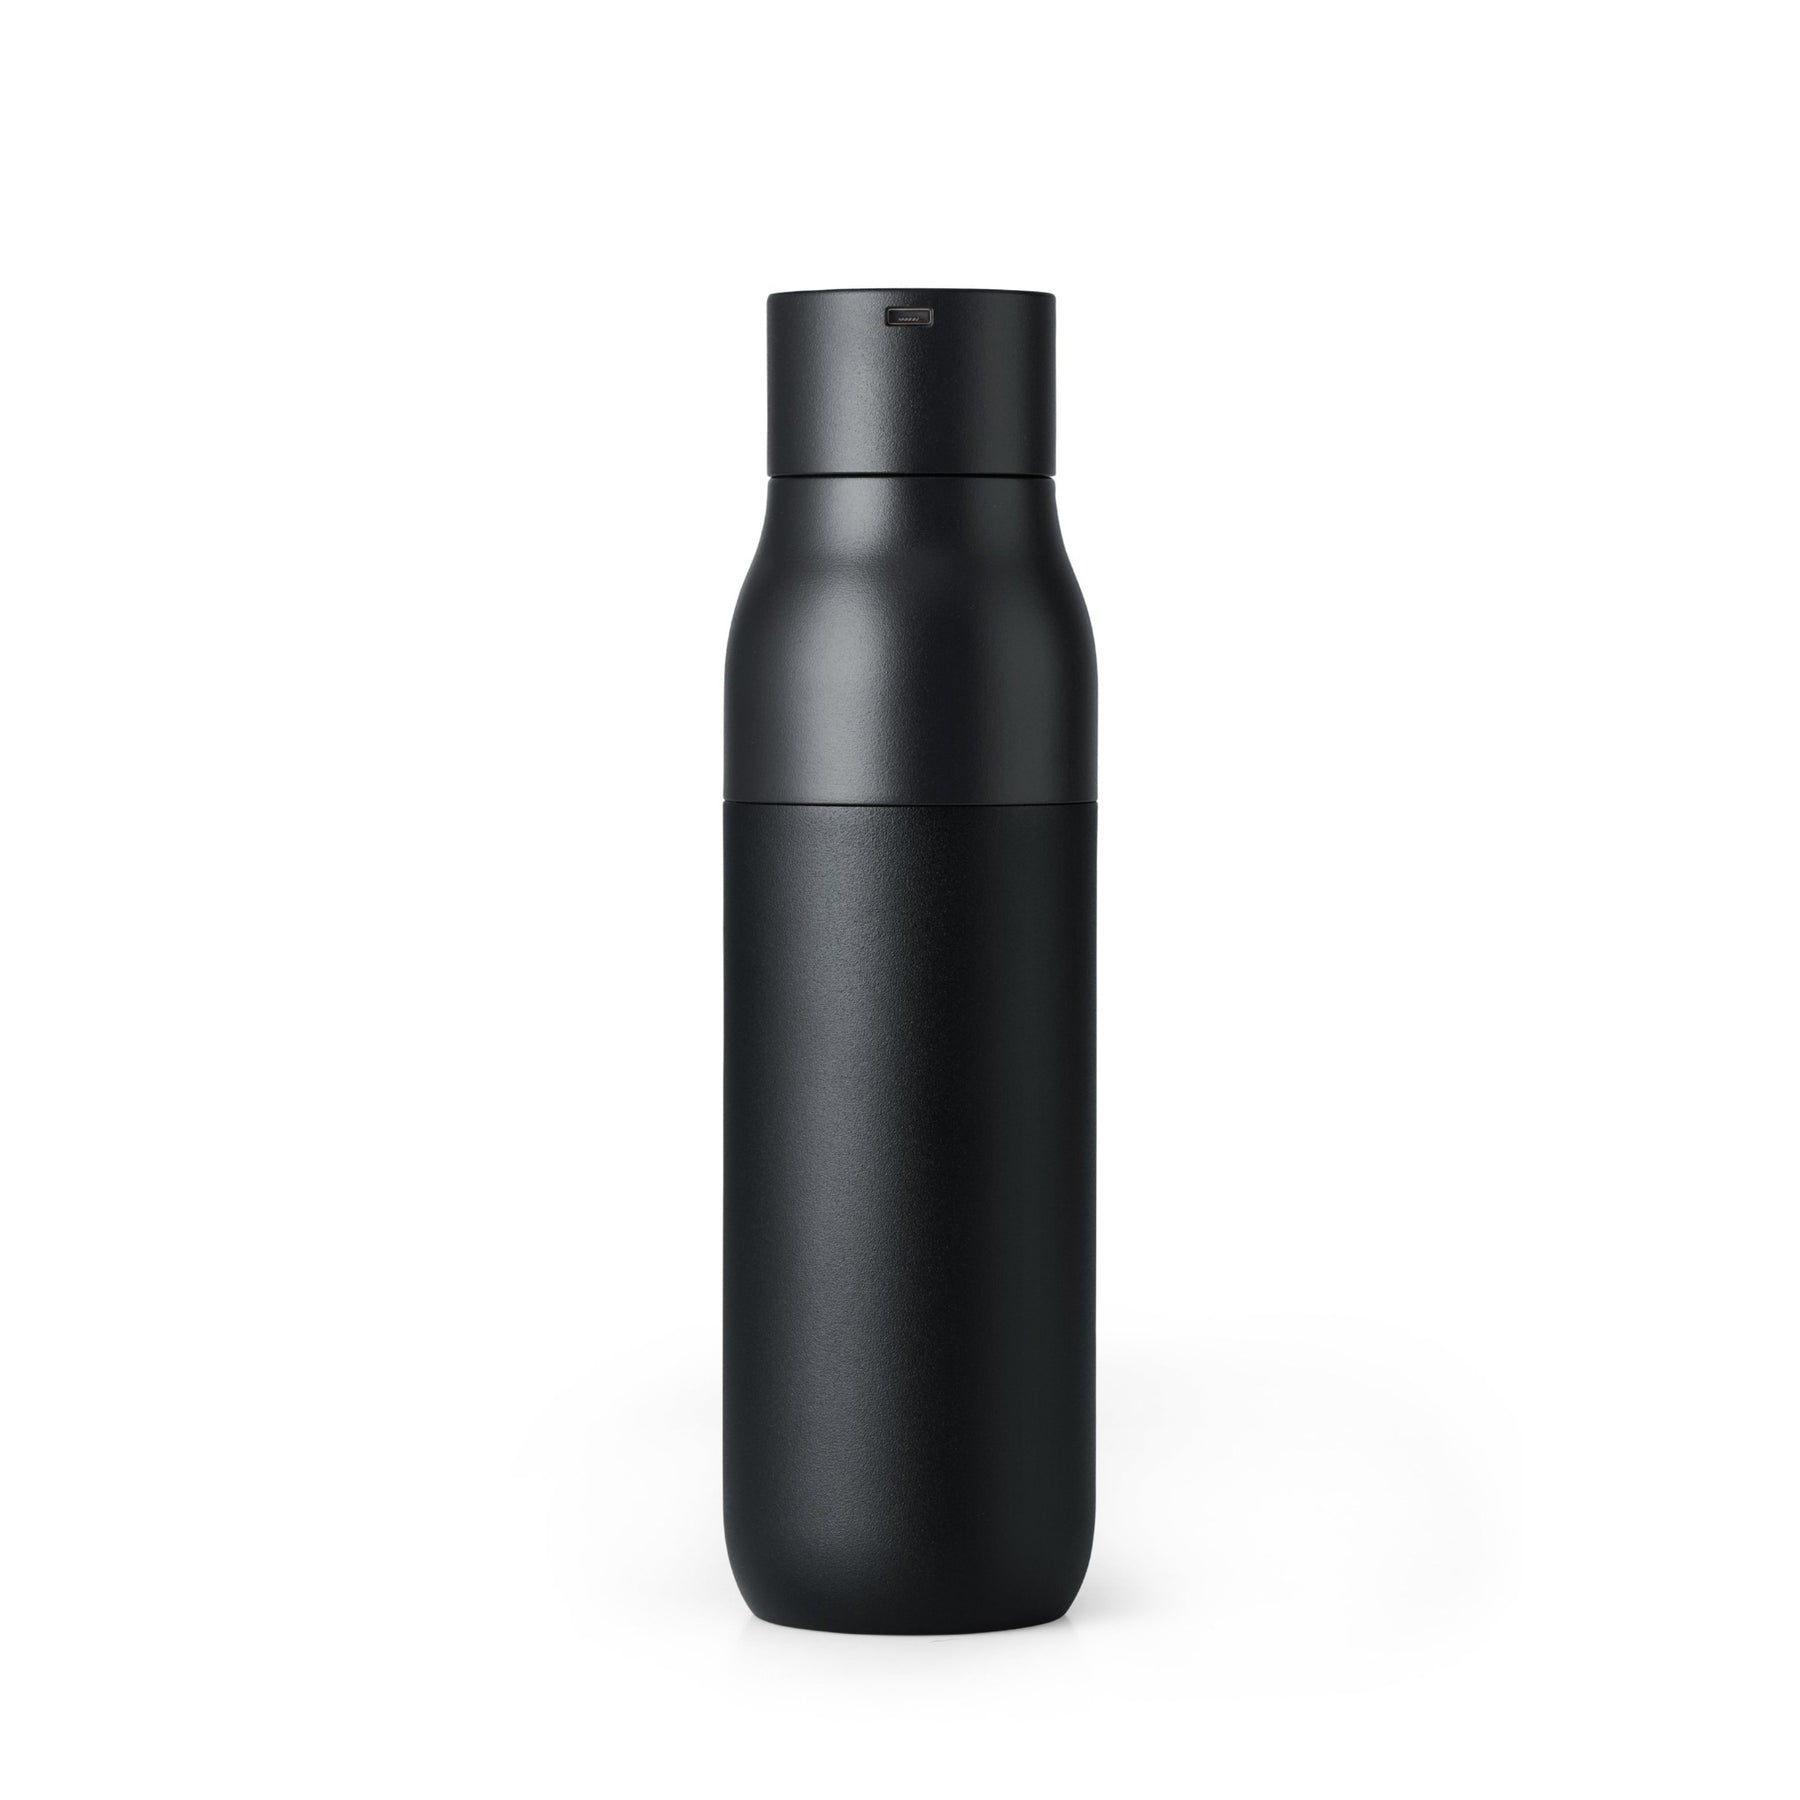 500ml/17oz Minimalist Natural Color Large Capacity Stainless Steel